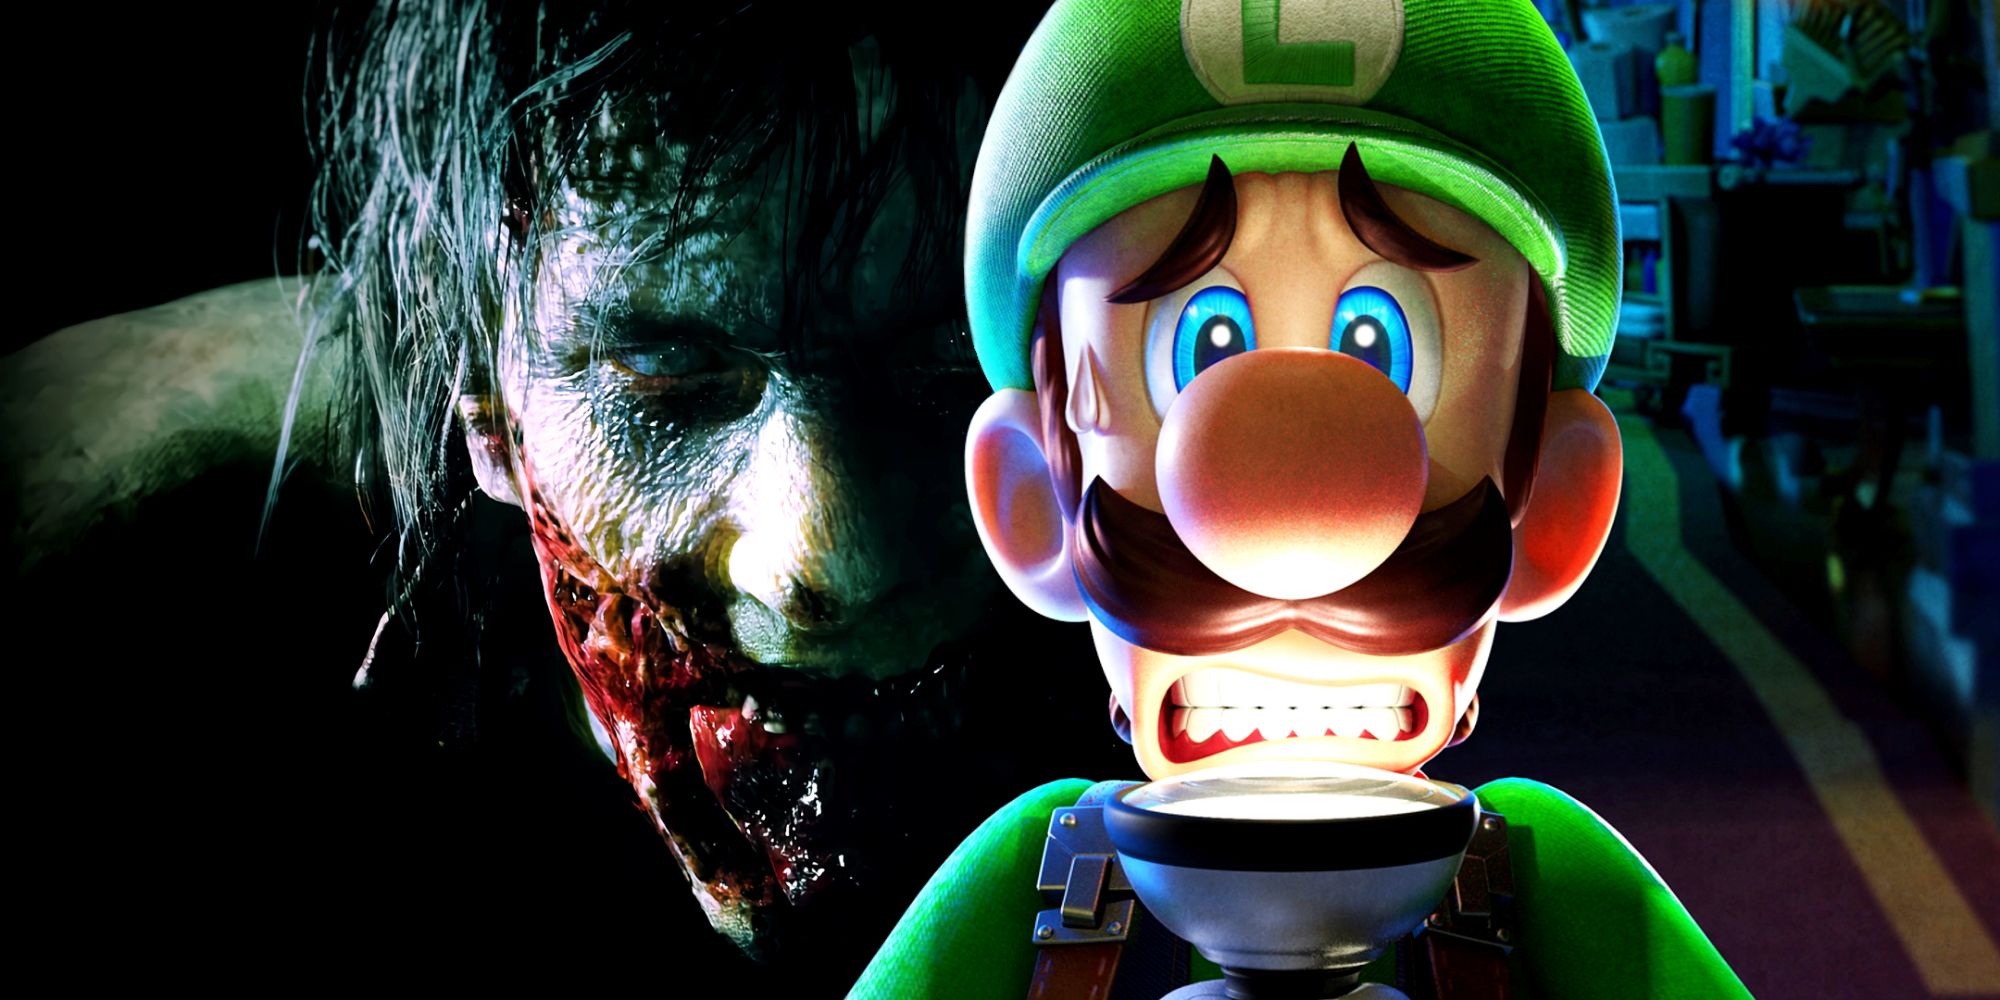 Luigi from Luigi's Mansion 3, looking scared with a flashlight illuminating his face. Over his shoulder is a zombie with a bloody face from Resident Evil 2.